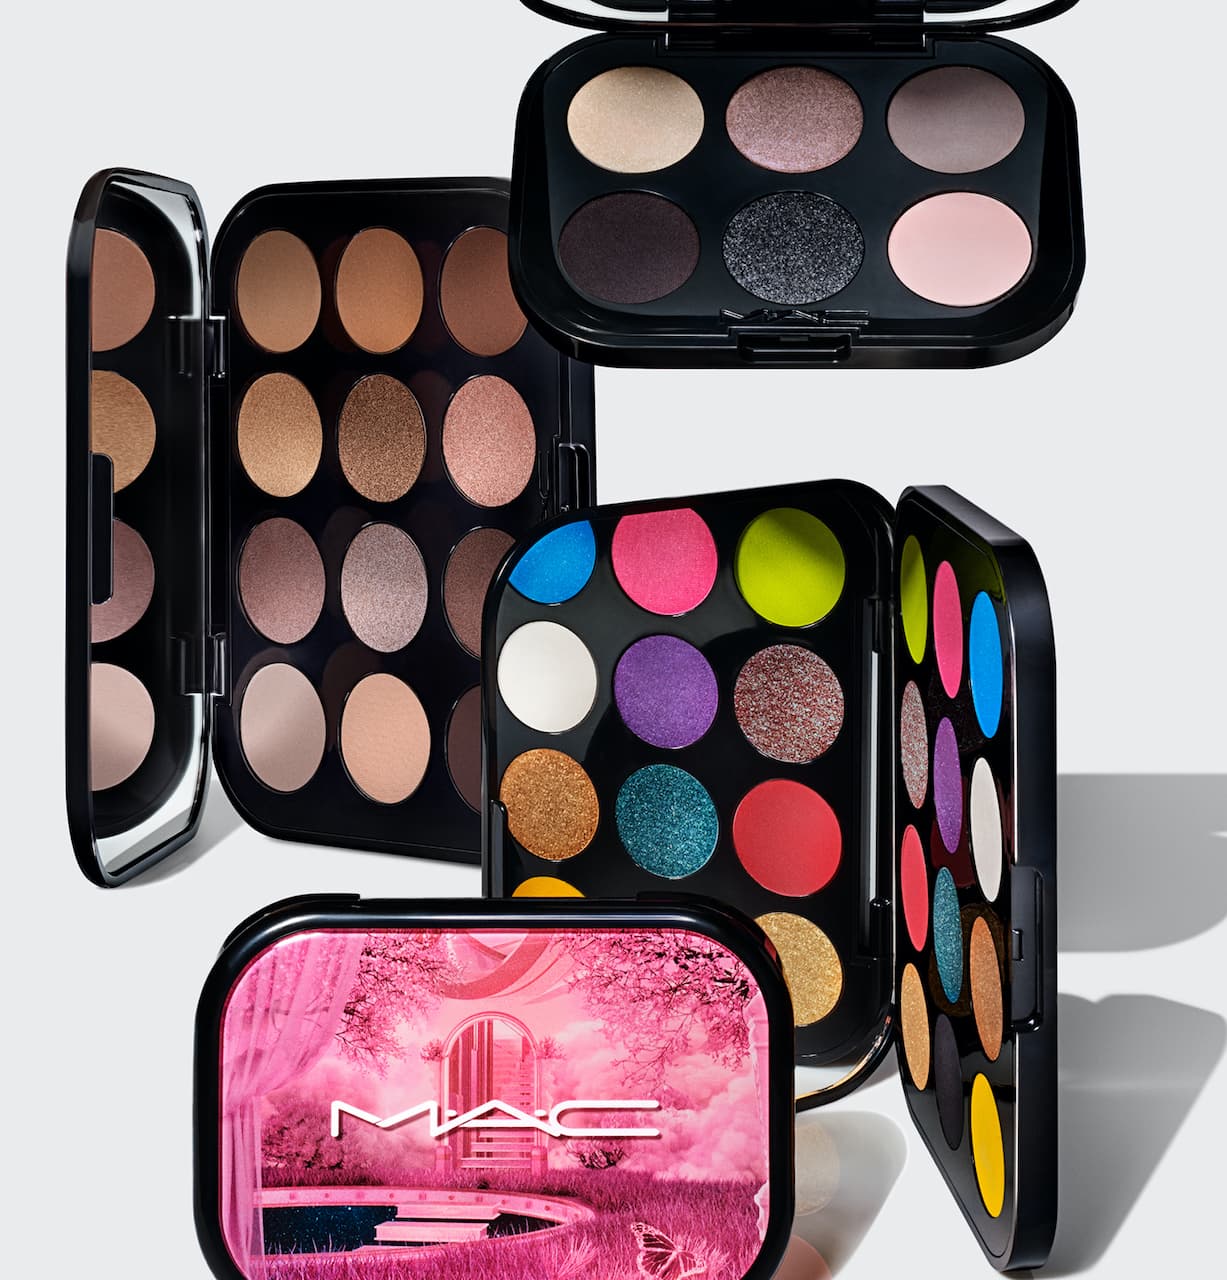 Connect In Colour Eye Shadow Palette by M.A.C